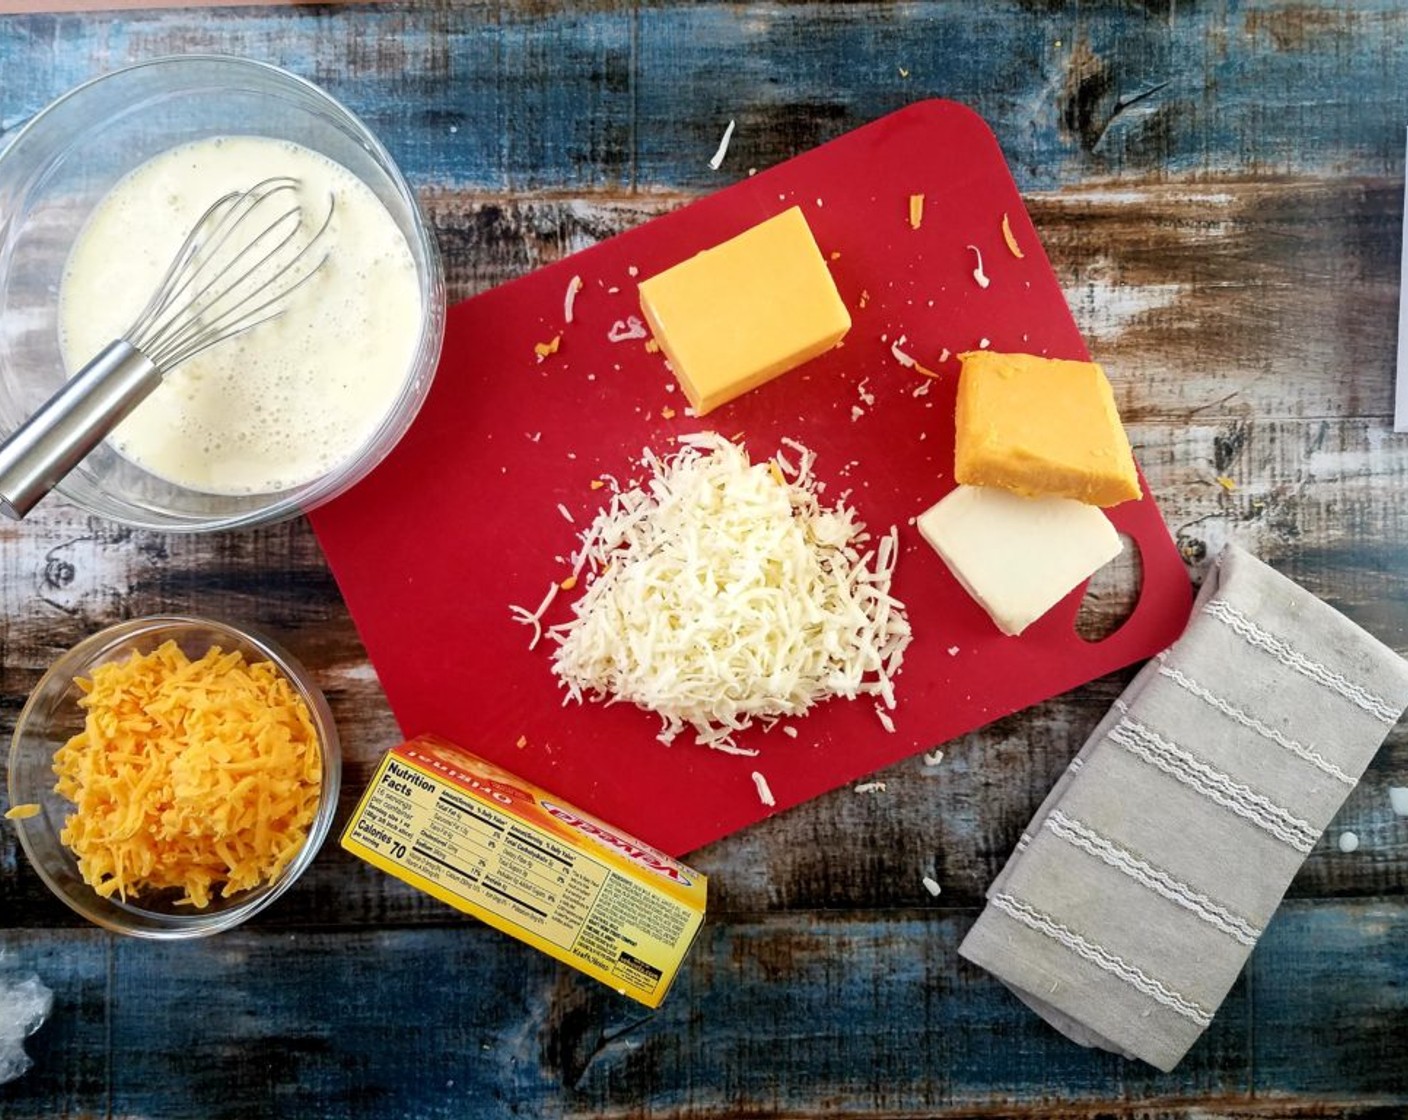 step 1 Cube the Velveeta® Original Pasteurized Cheese Product (2 cups), and shred the Sharp Cheddar Cheese (1 cup) and Monterey Jack Cheese (3/4 cup).